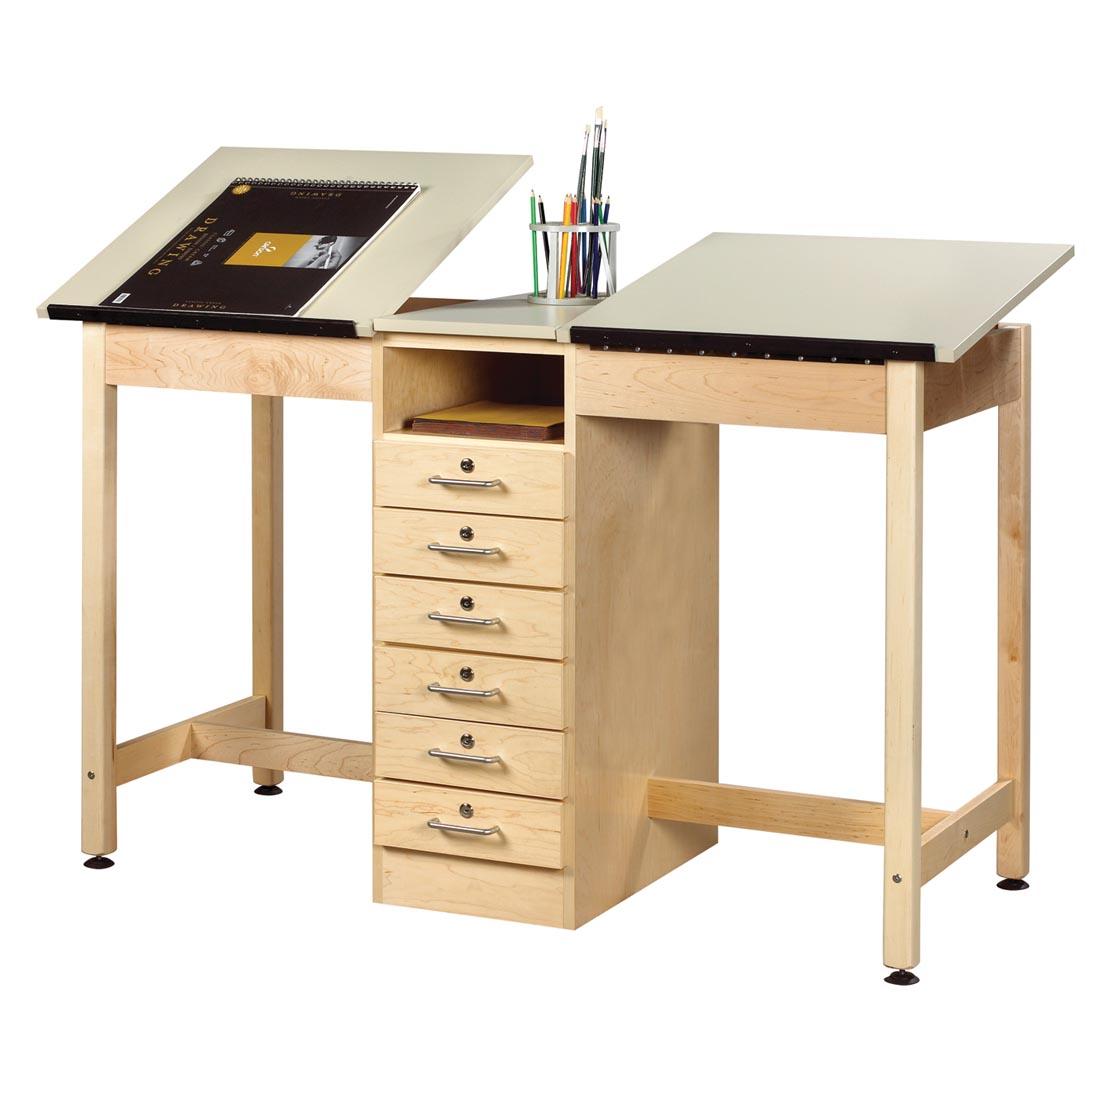 2 Station Art/Drafting Table; both desk tops are in slanted position